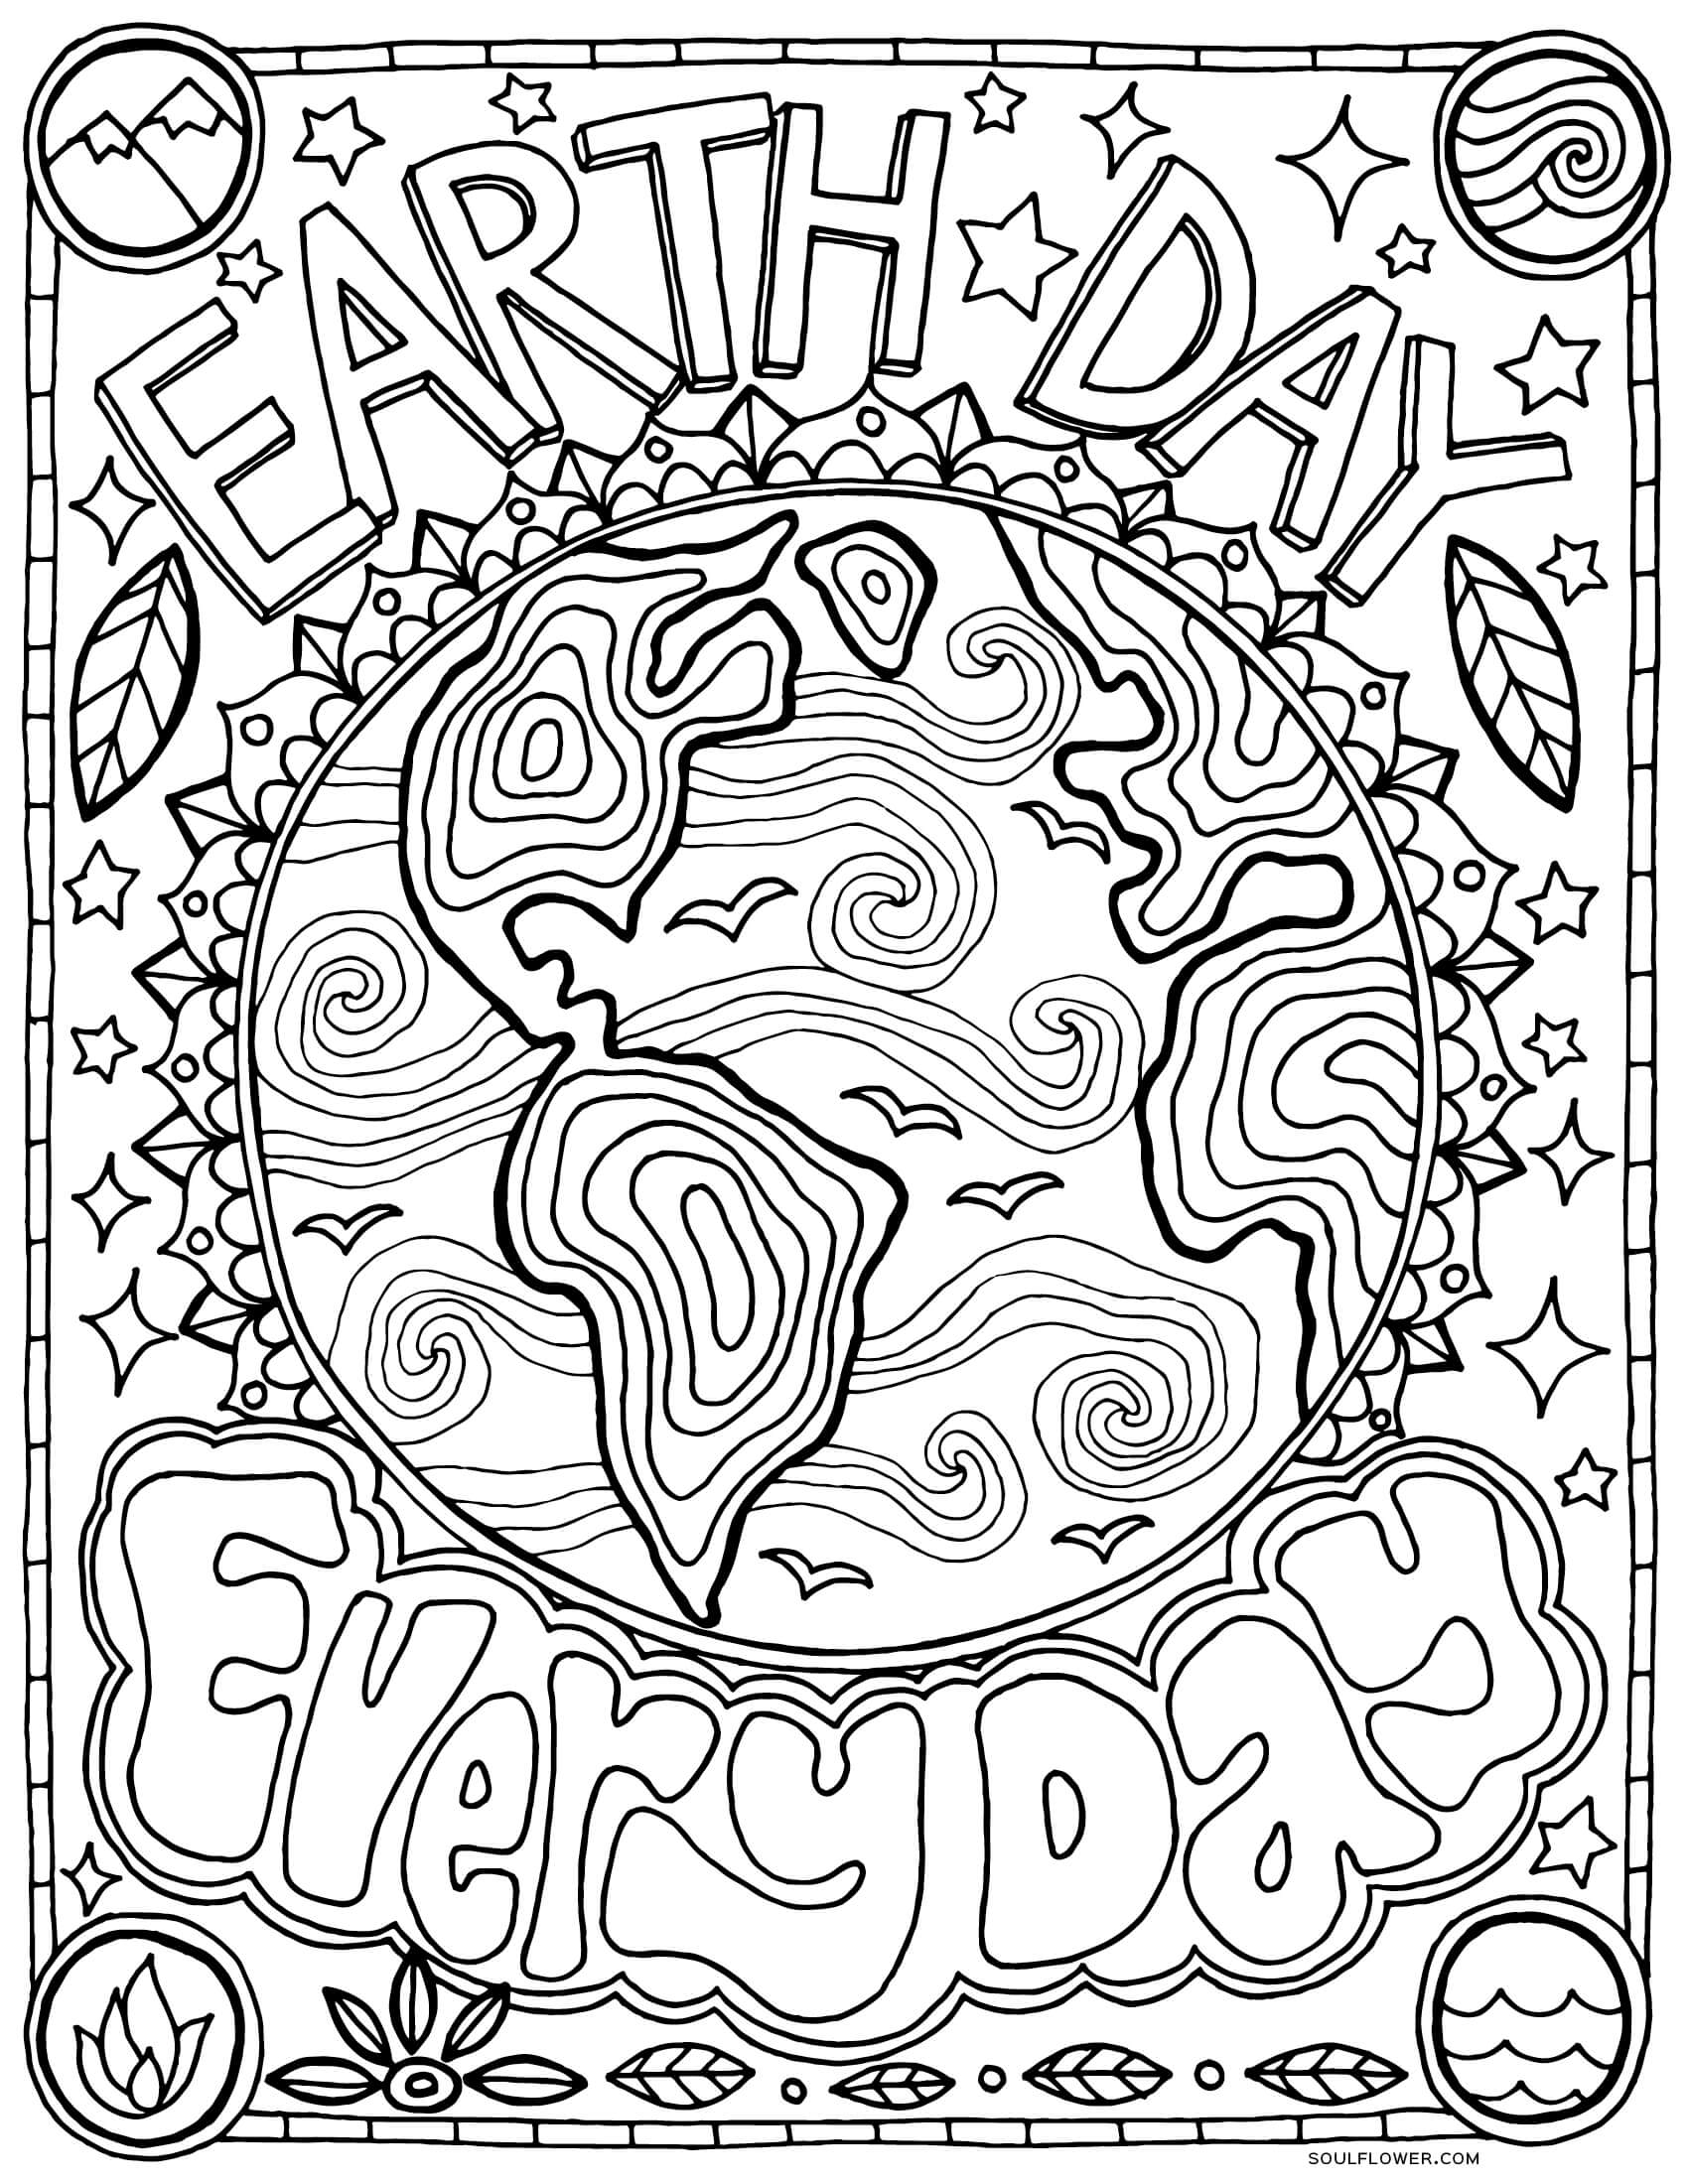 Printable Earth Day Coloring Pages For Preschoolers